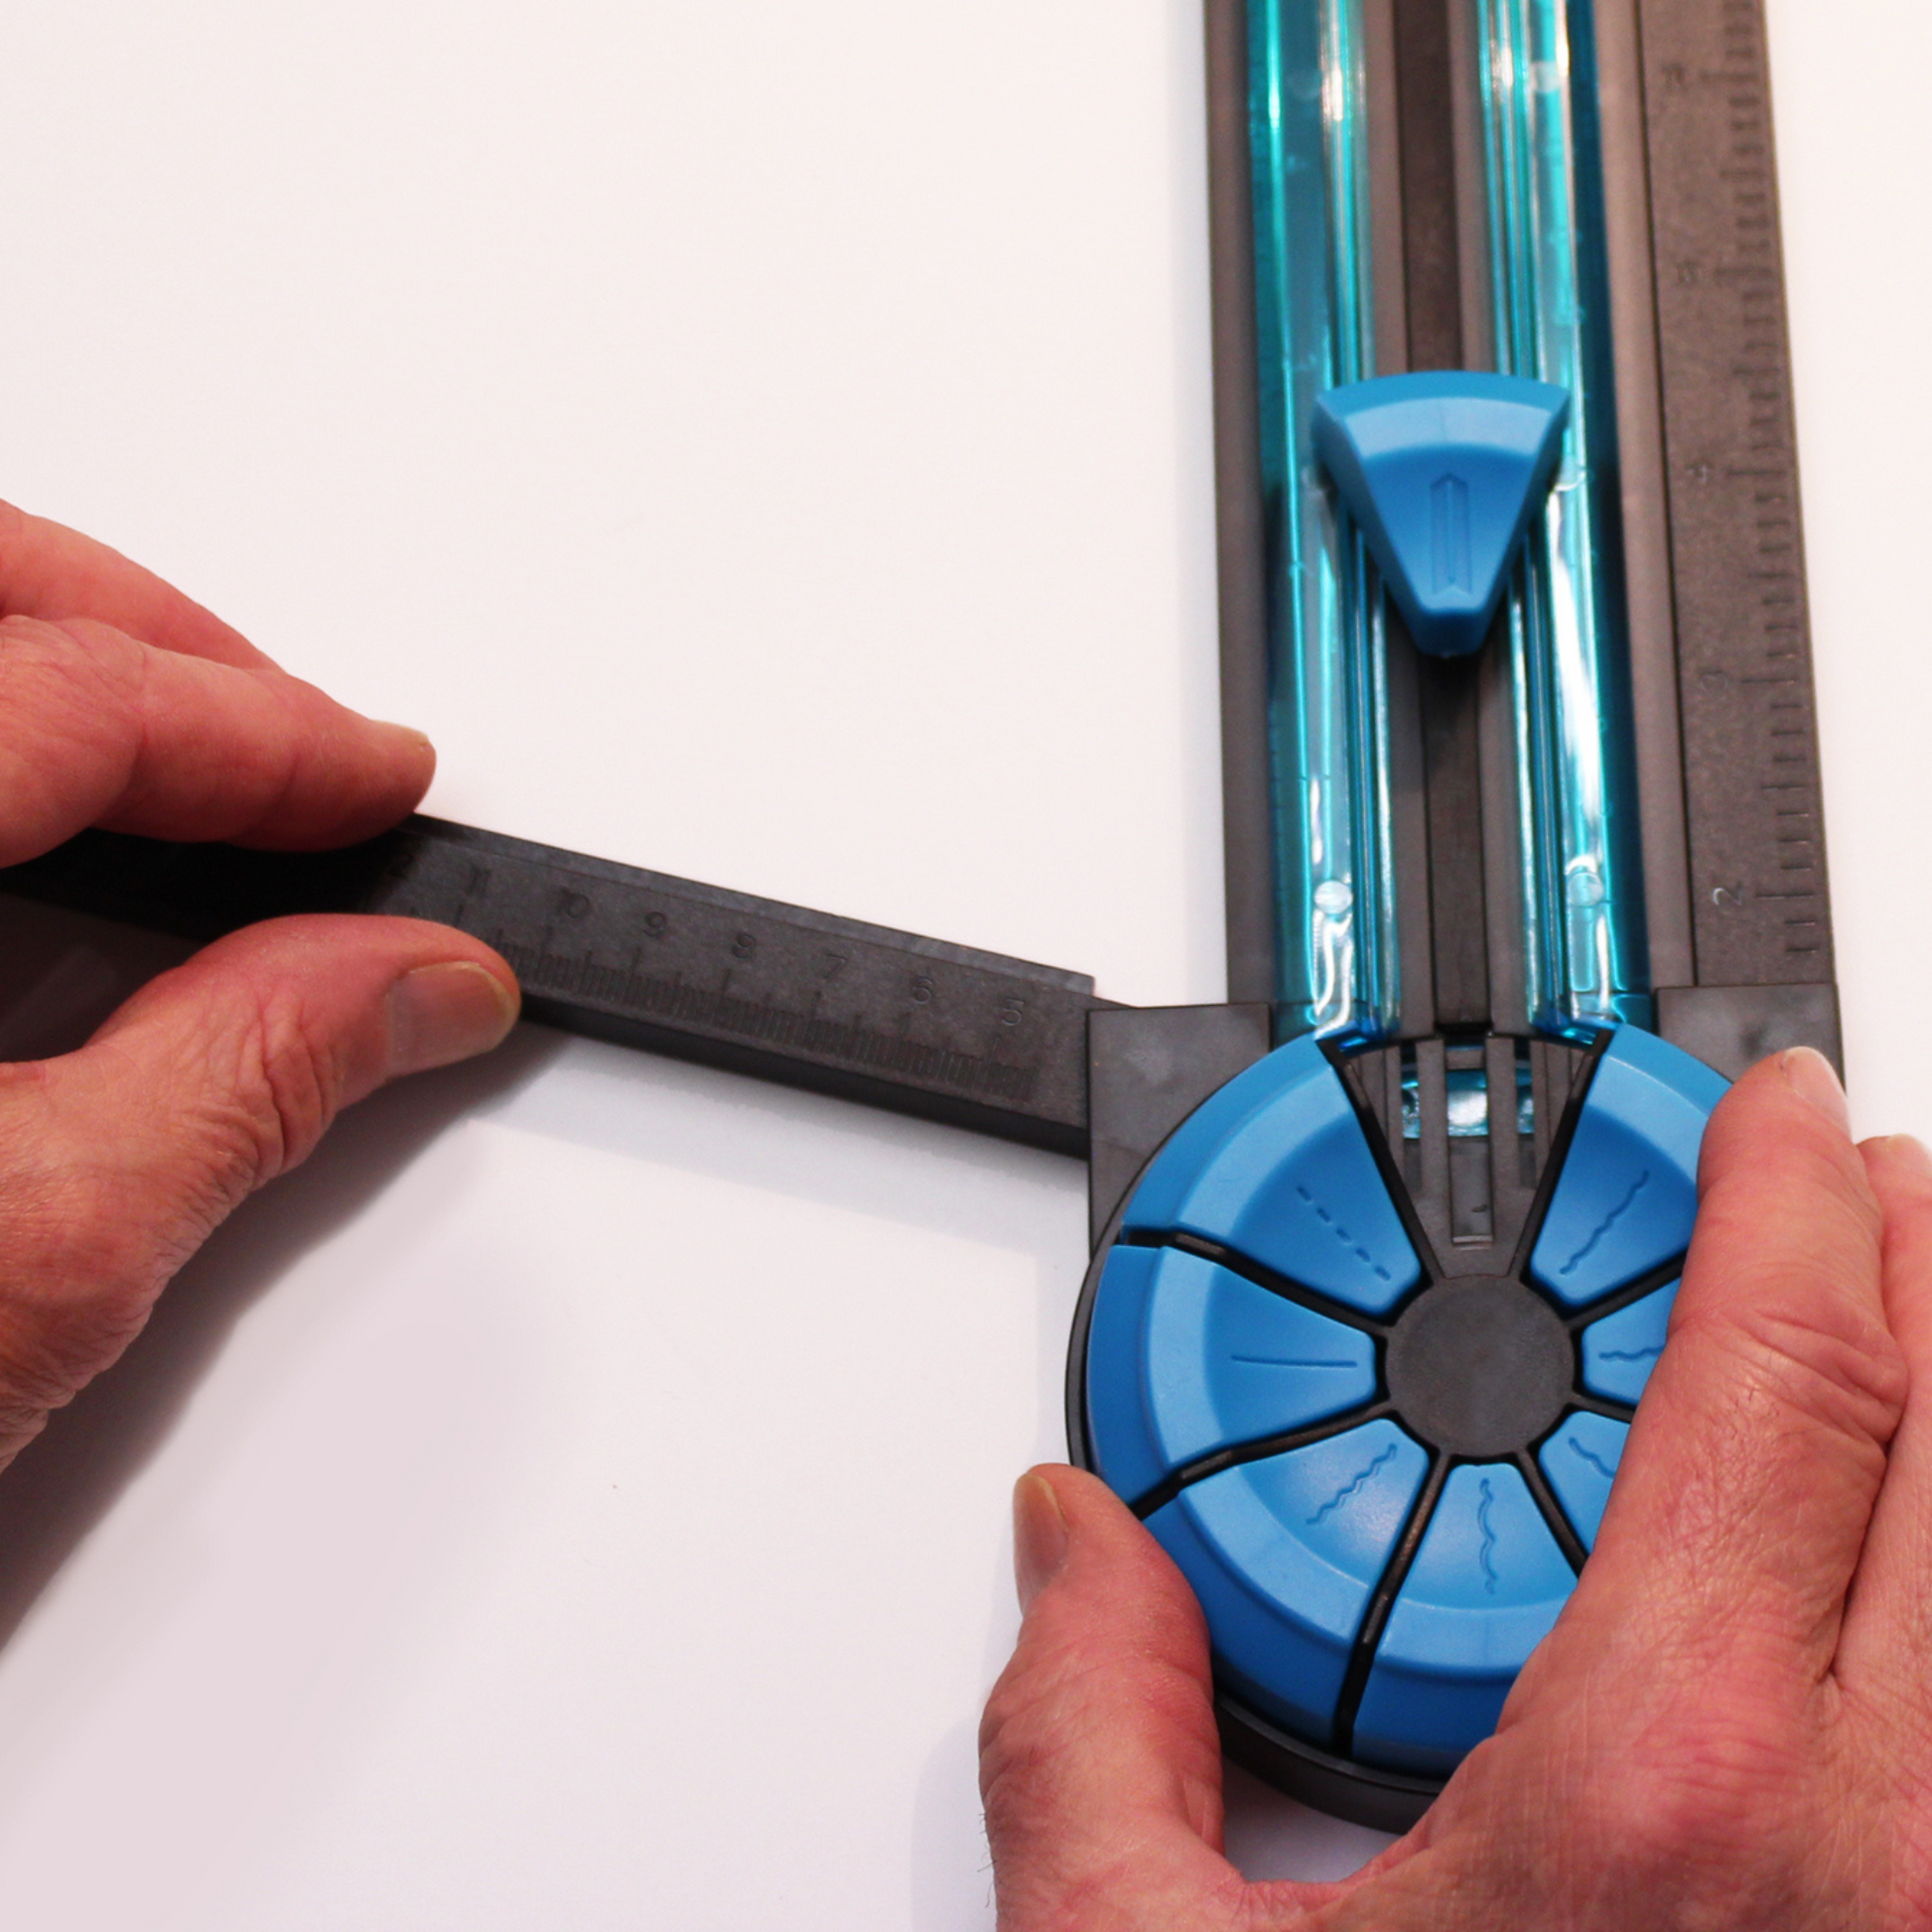 Hands precisely adjusting the blue dial of an A4 Dial-A-Blade Creative Trimmer, with a focus on the measurement ruler and cutting track, demonstrating the trimmer's functionality for detailed paper cutting tasks.